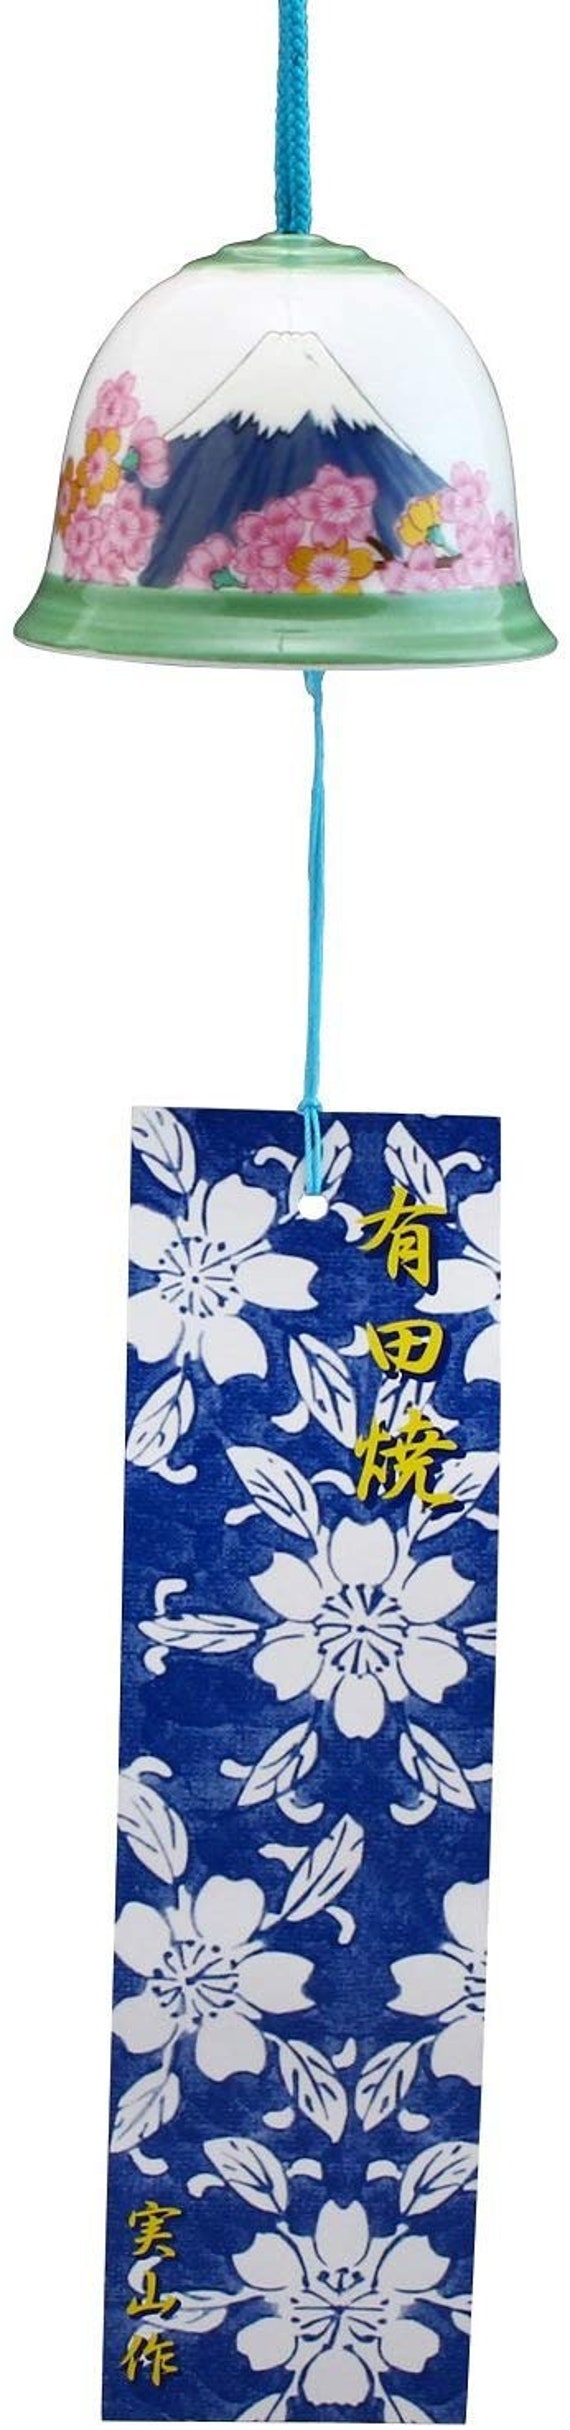 From Japan Furin Wind Chime Bell Arita